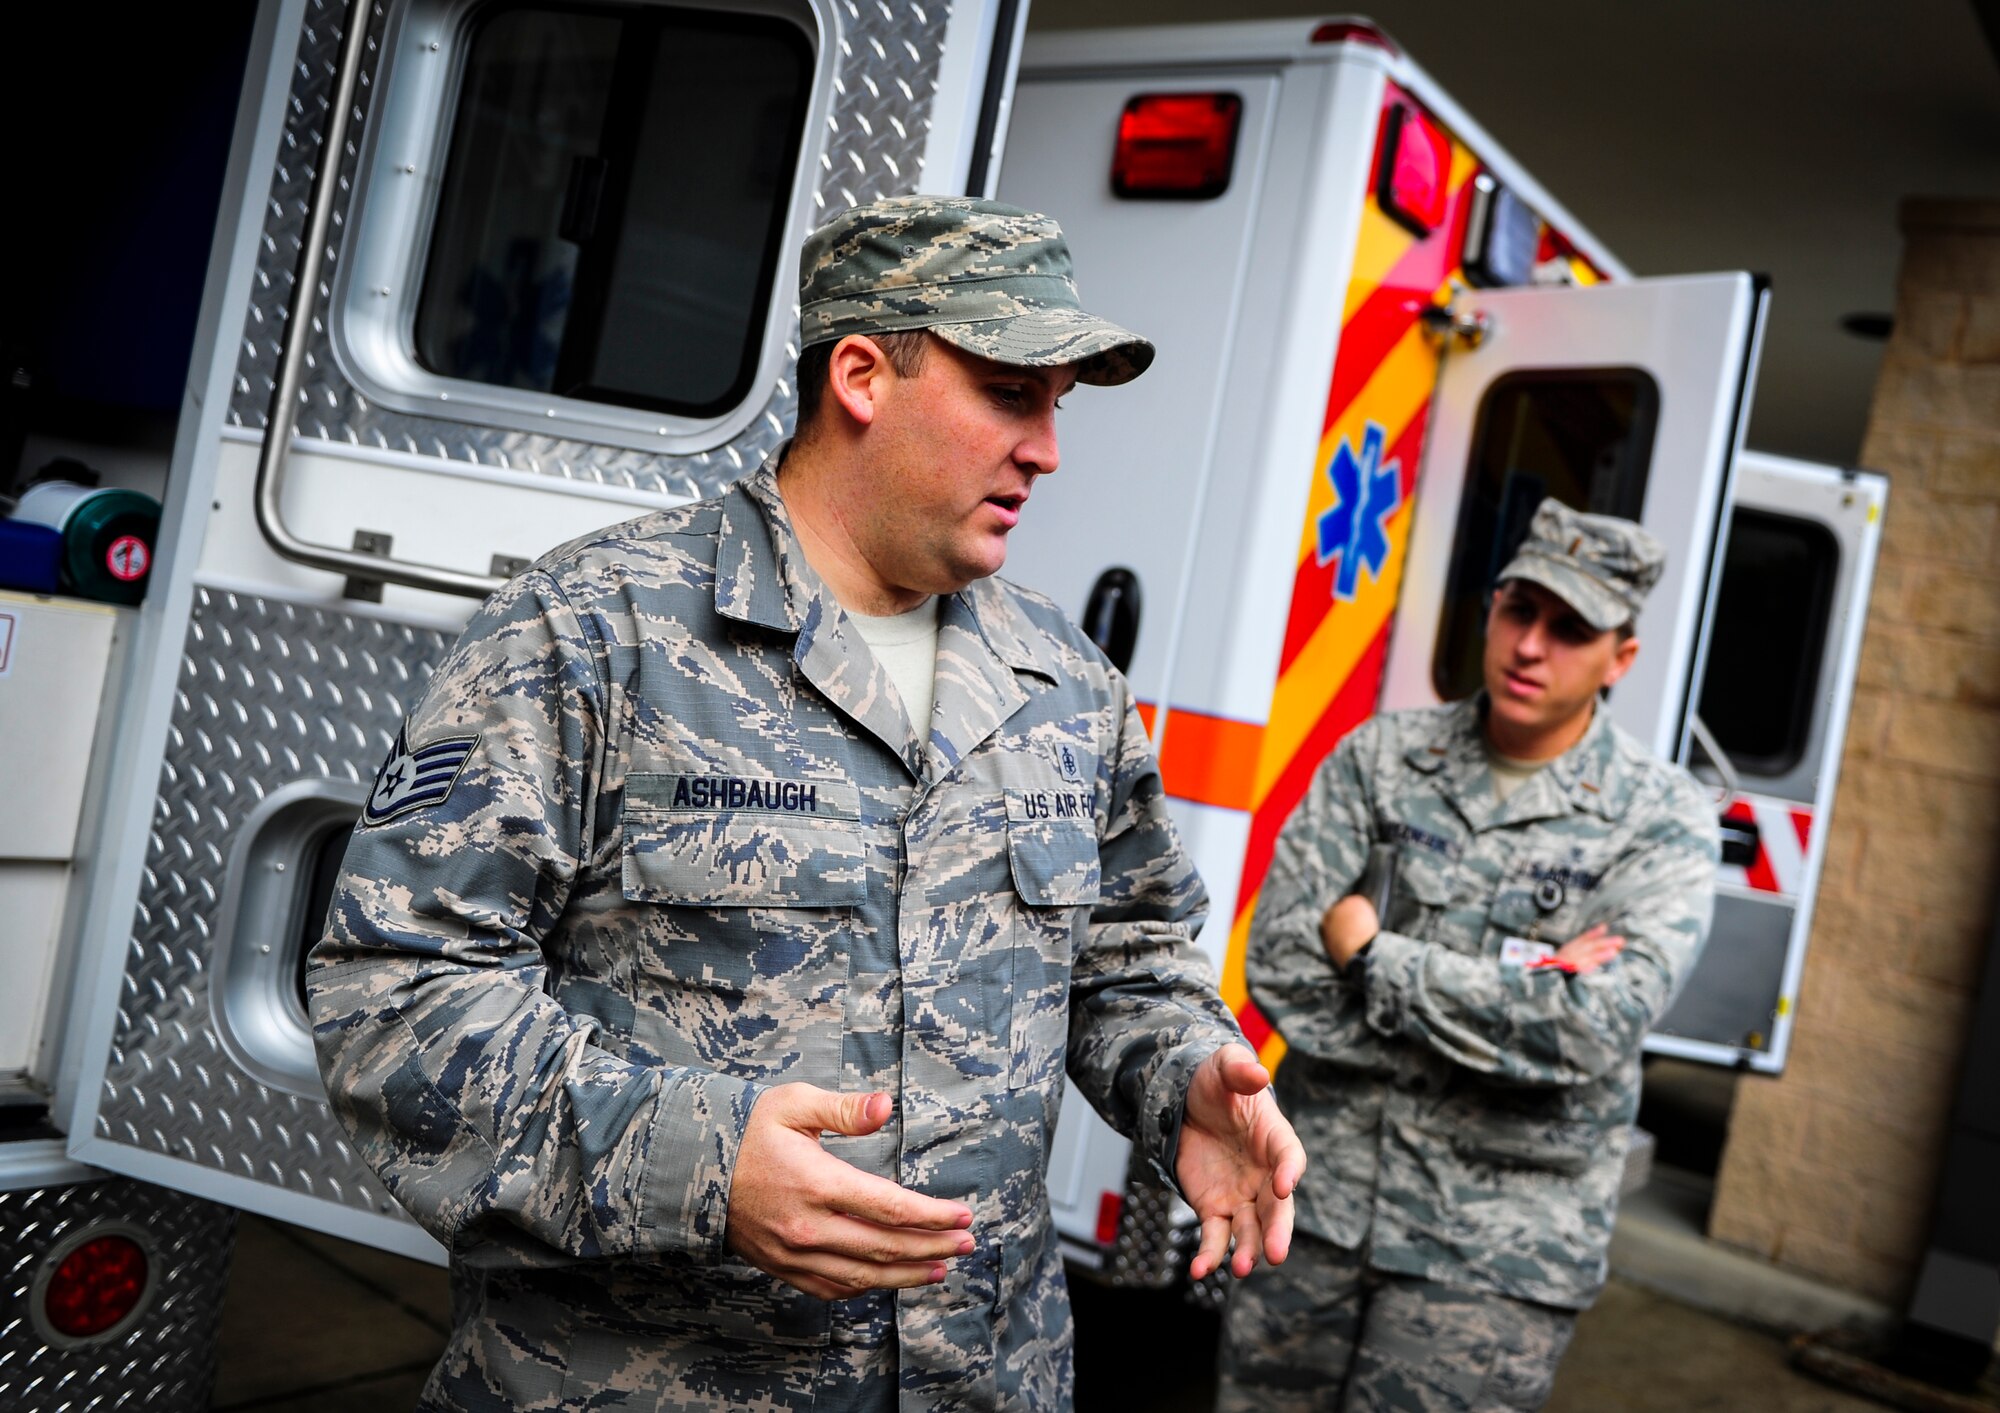 Staff Sgt. Brock Ashbaugh, 1st Special Operations Medical Operations Squadron ambulatory service paramedic, explains the differences between the new and older ambulances on Hurlburt Field, Fla., Dec. 30, 2014. The 1st SOMDOS received one of three new ambulances to add to their fleet. (U.S. Air Force photo/Senior Airman Christopher Callaway) 